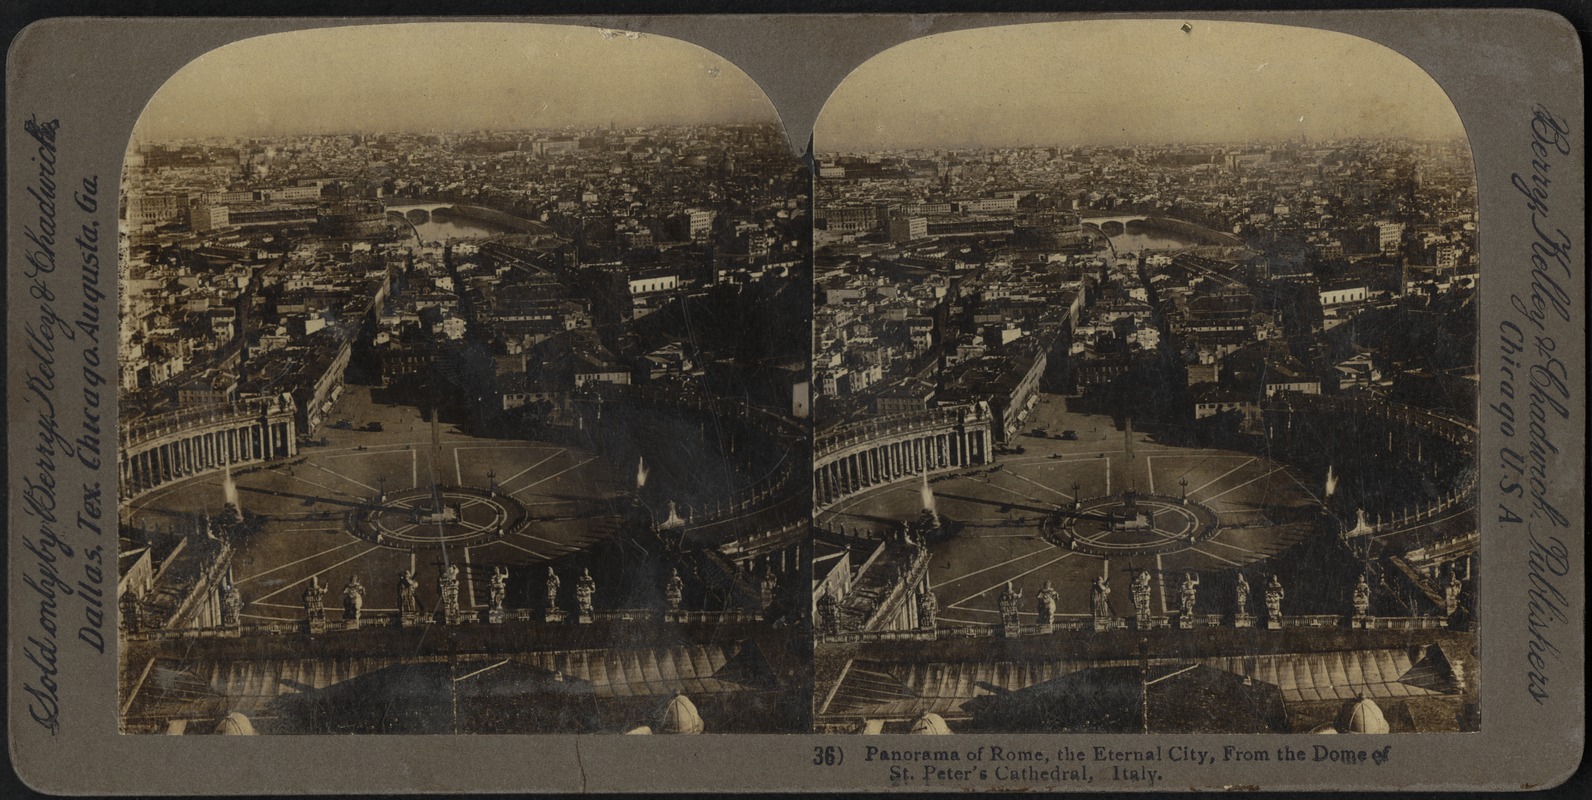 Panorama of Rome, the eternal city, from the dome of St. Peter's Cathedral, Italy